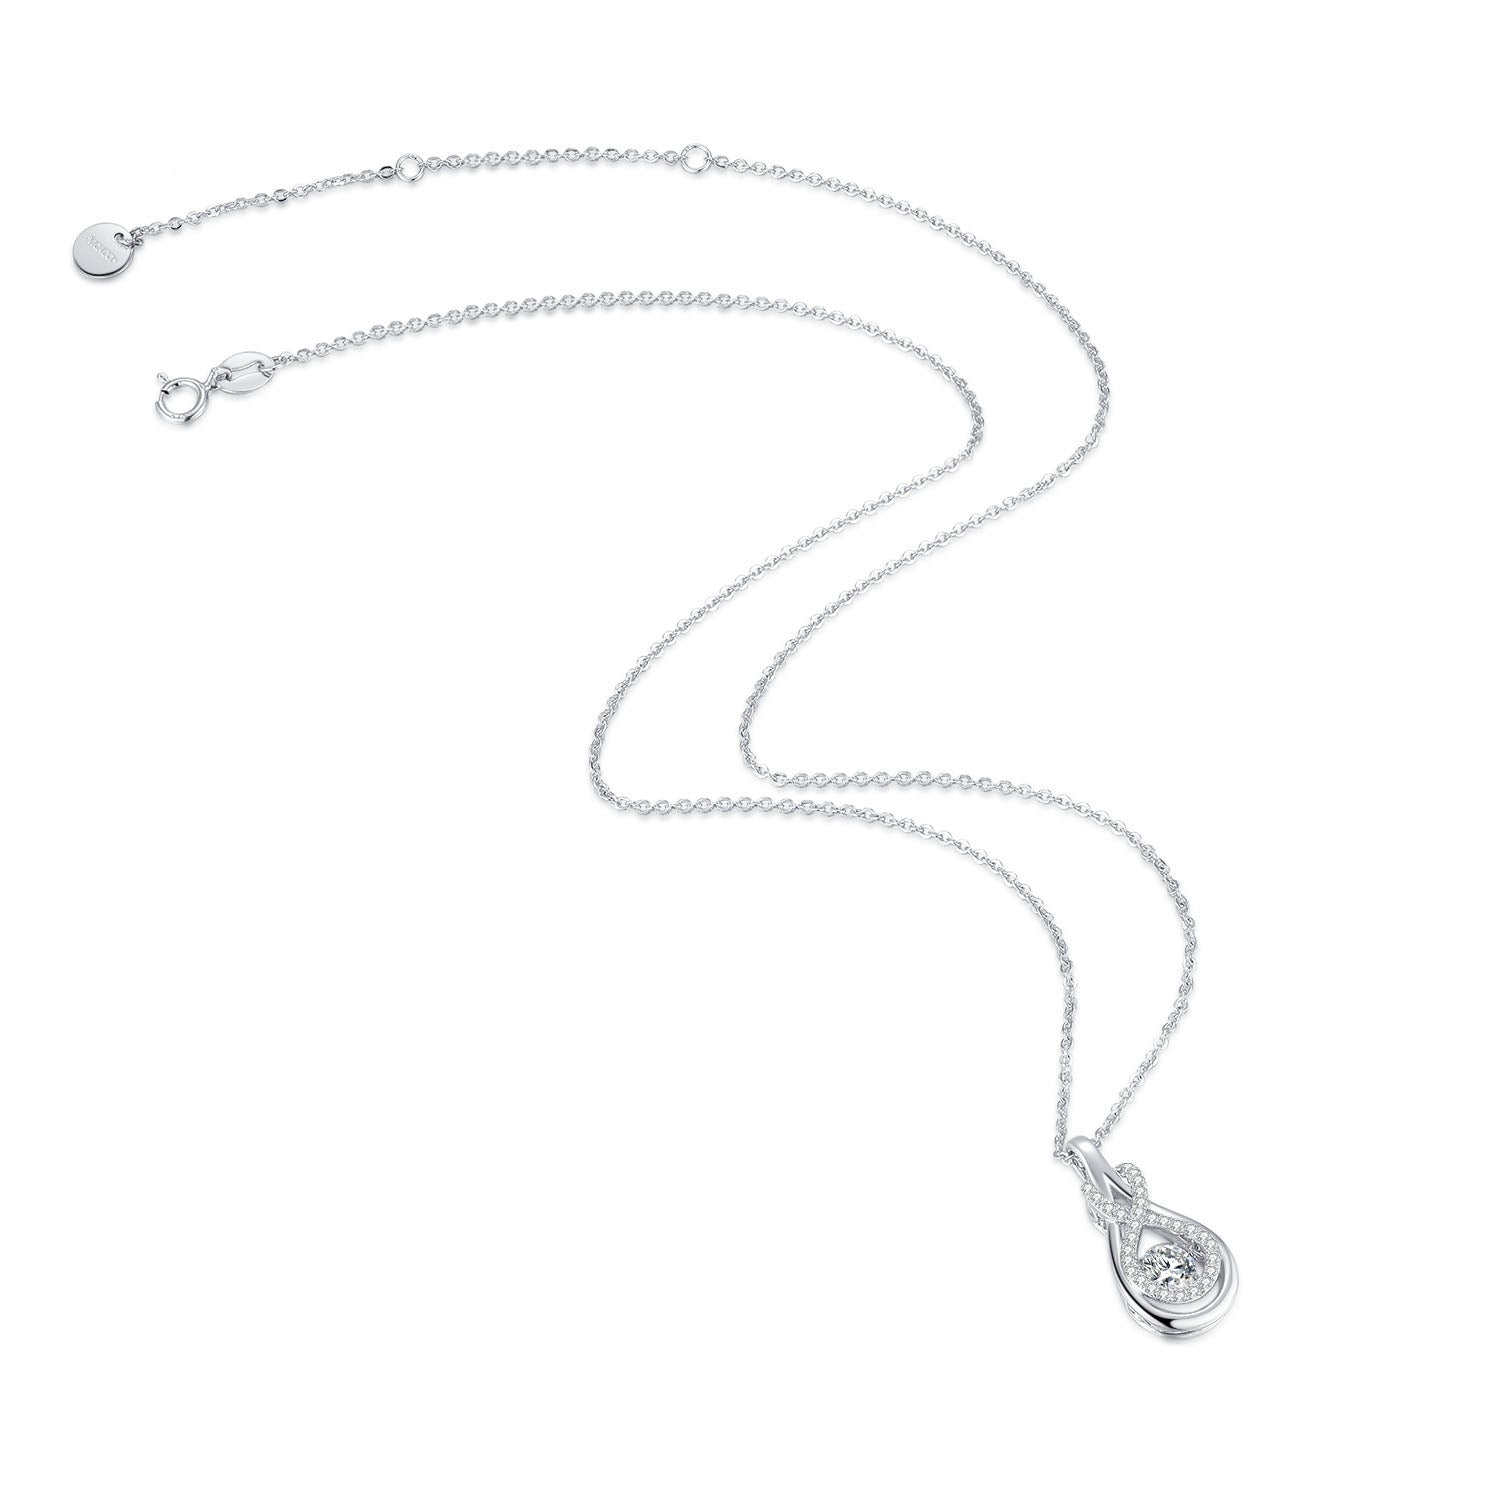 Fashion Smart 925 Sterling Silver Necklace